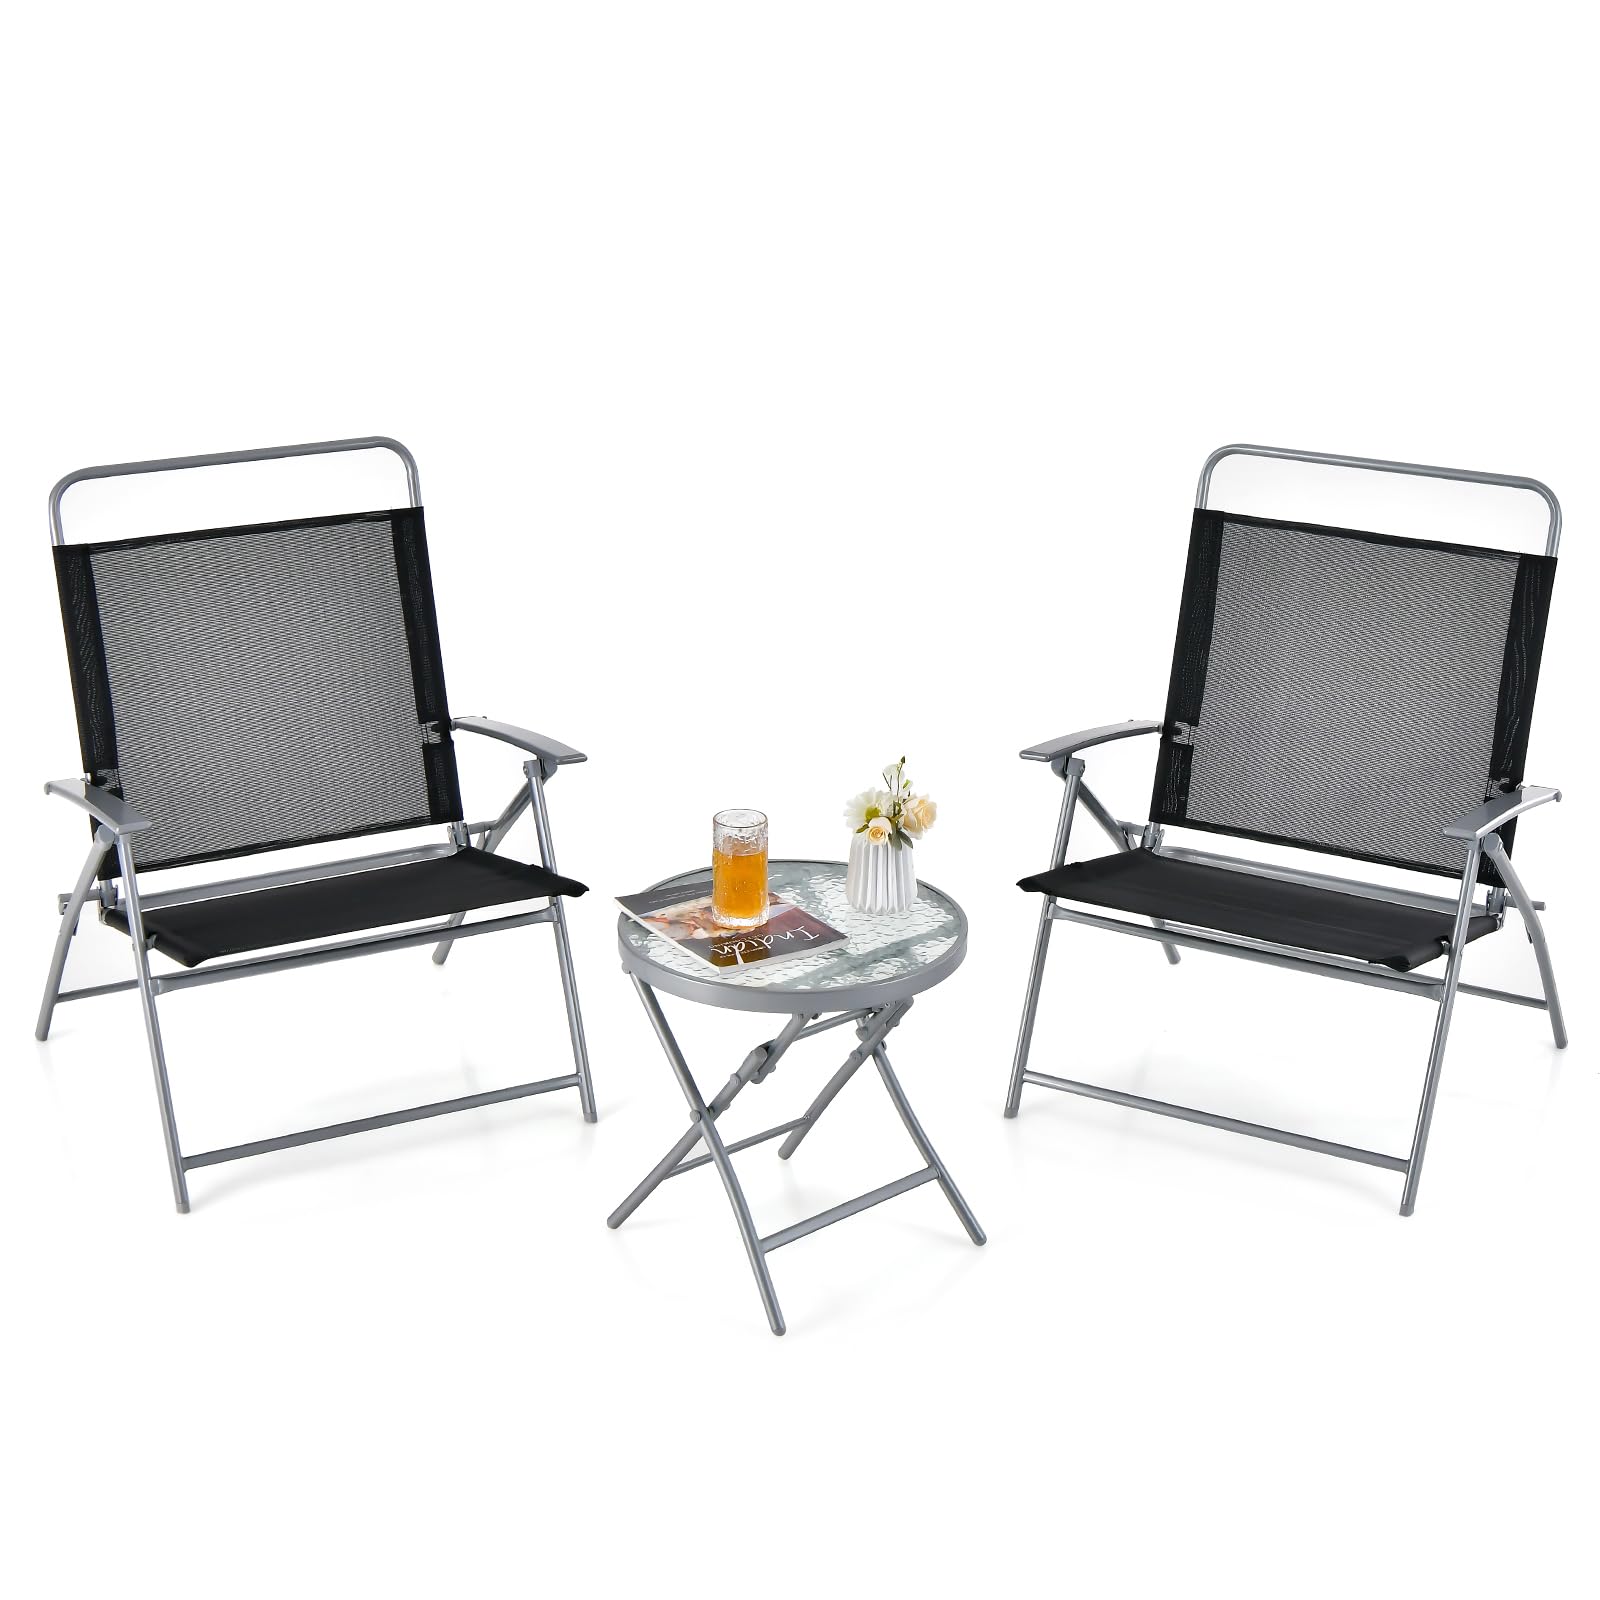 Giantex 3PCS Patio Bistro Set, Folding Outdoor Patio Table Set with 2 Foldable Chairs, 1 Ripple-Like Glass Table